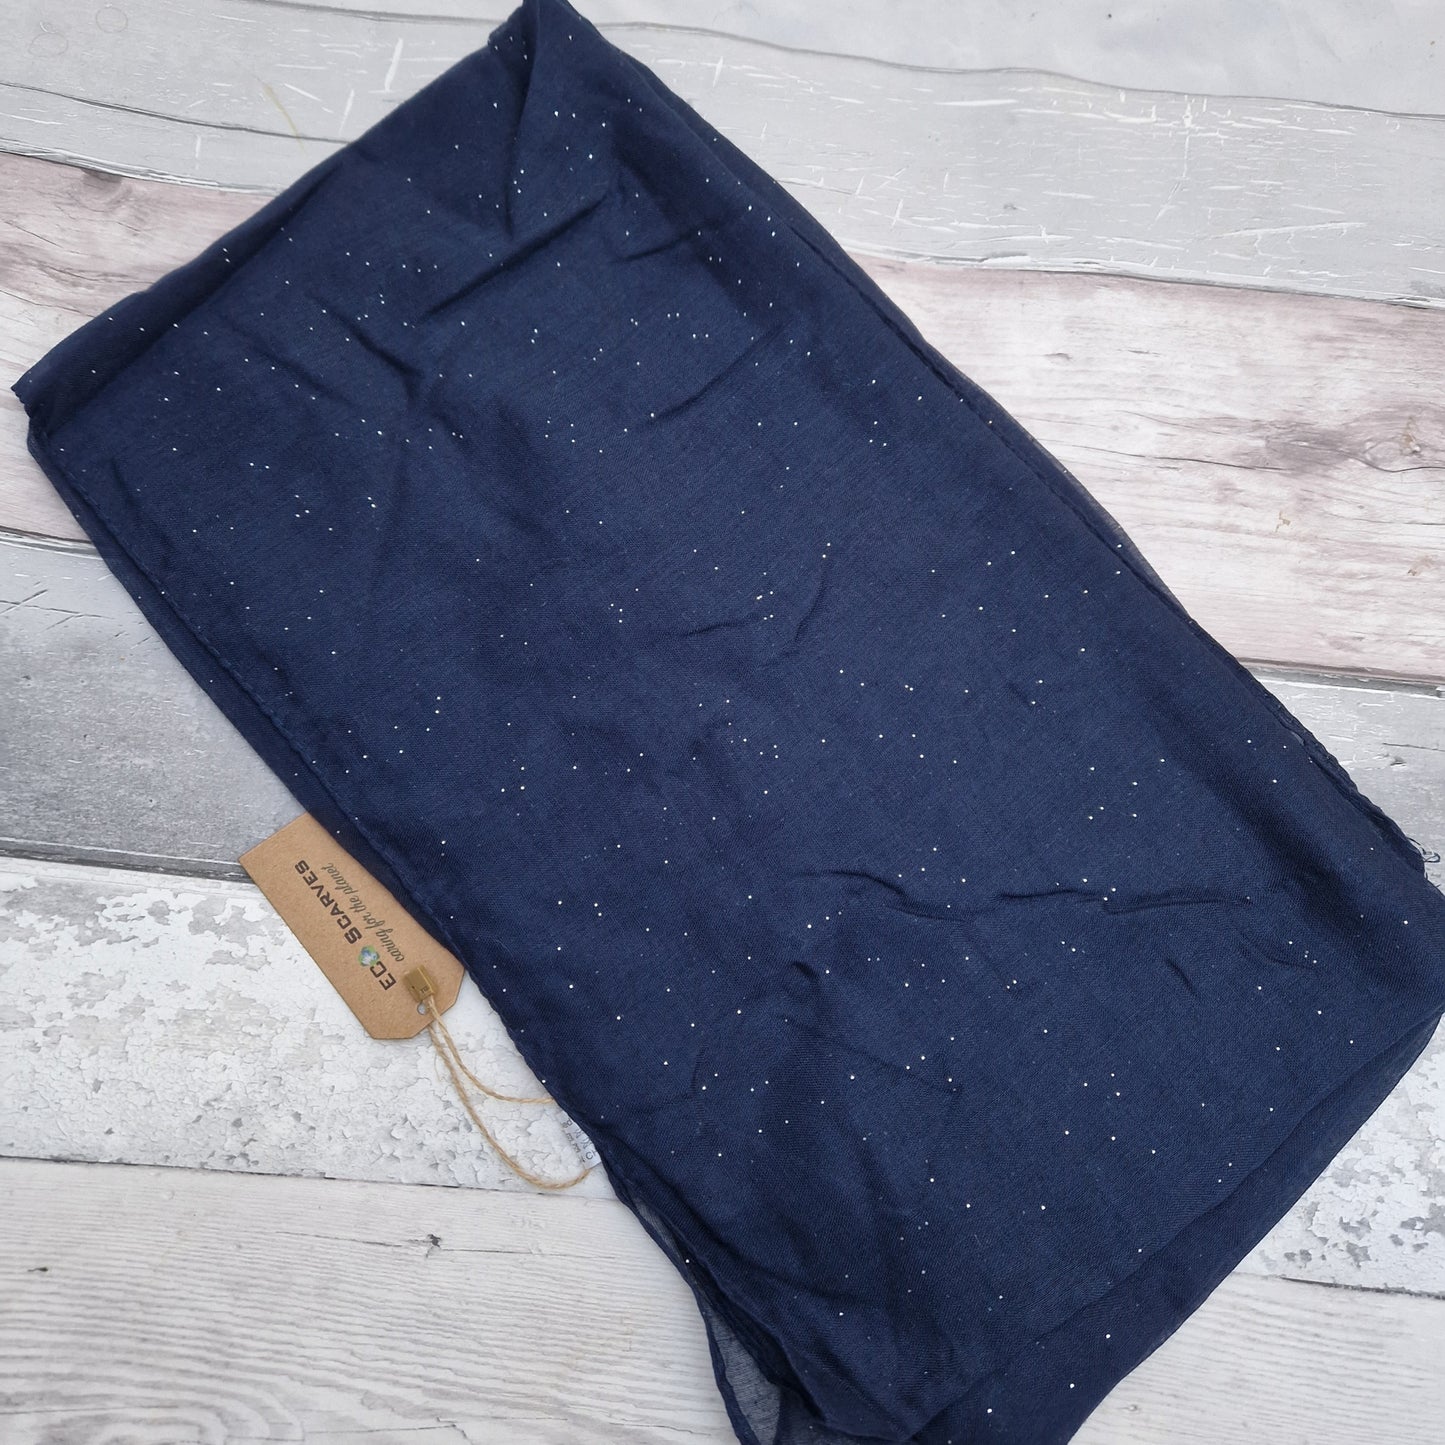 Navy scarf with a silver glitter finish.